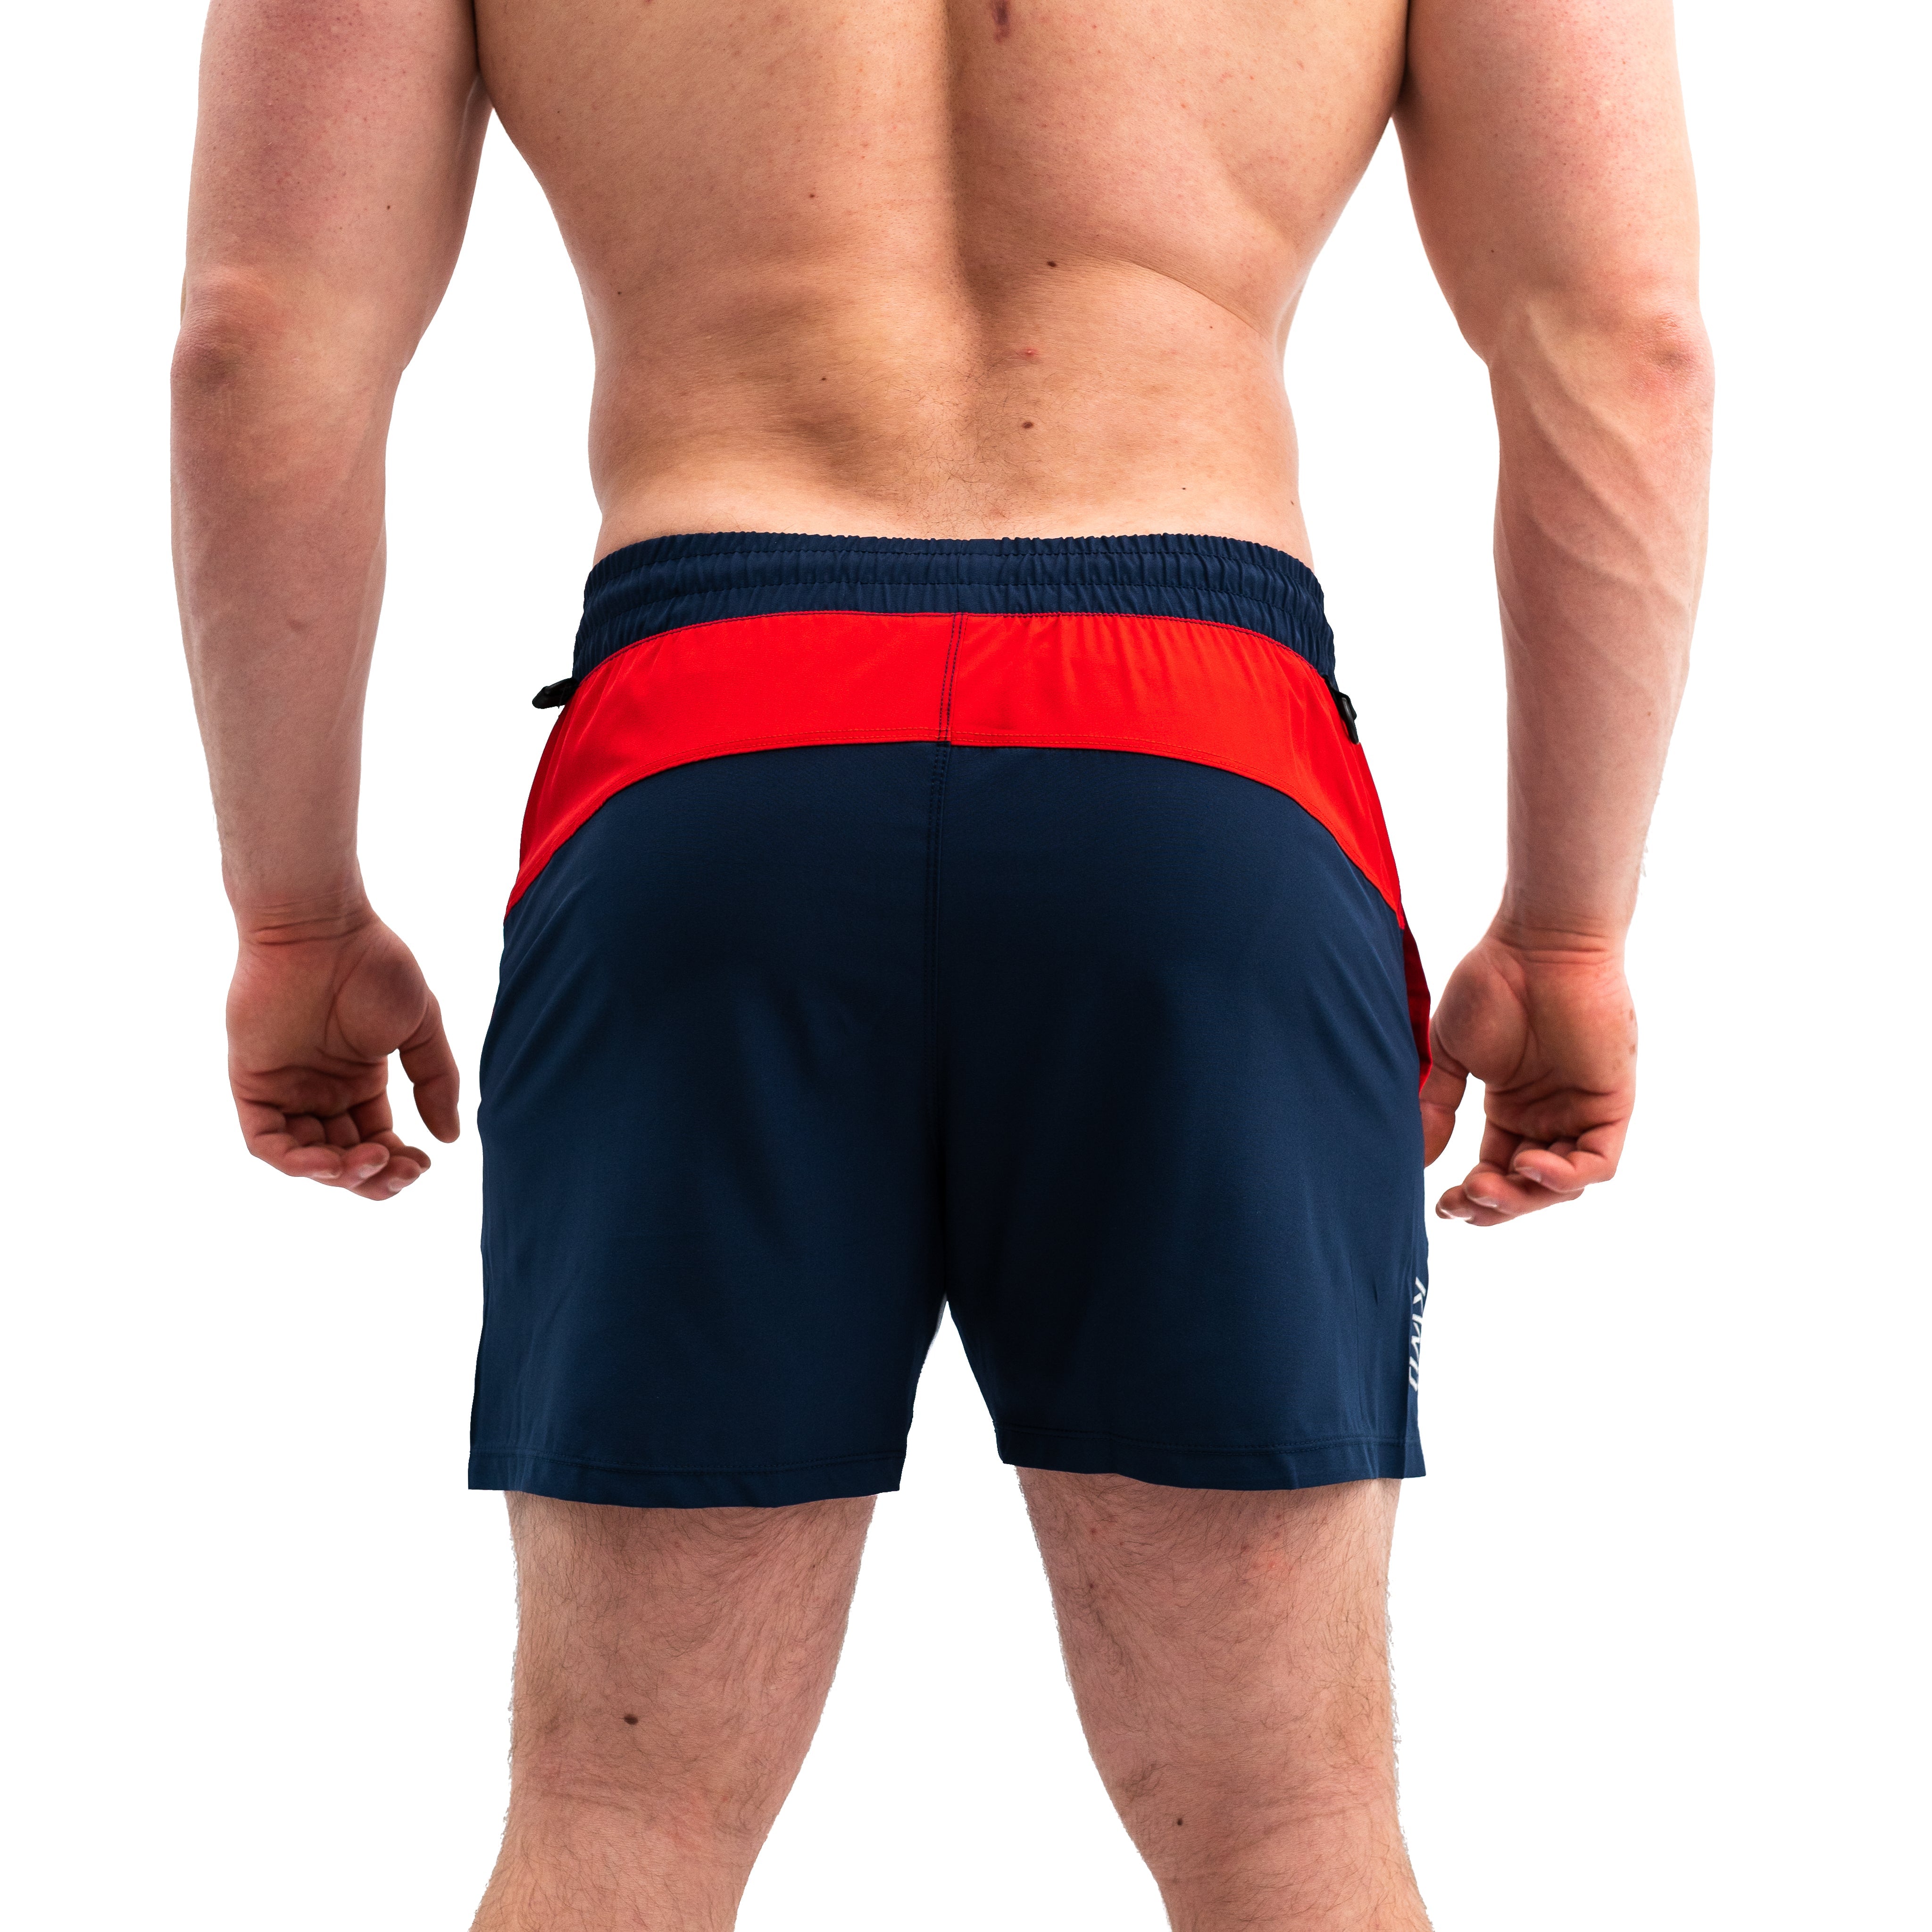 Have you ever squatted in shorts and realised that they may be too tight on you at the bottom of a squat? The shorts are made with stretchy fabric in between legs so you are never constricted during your squat. KWD shorts have a shorter inseam and are designed to show off your quads (KWaDs). Available in UK and Europe including France, Italy, Germany, Sweden and Poland.